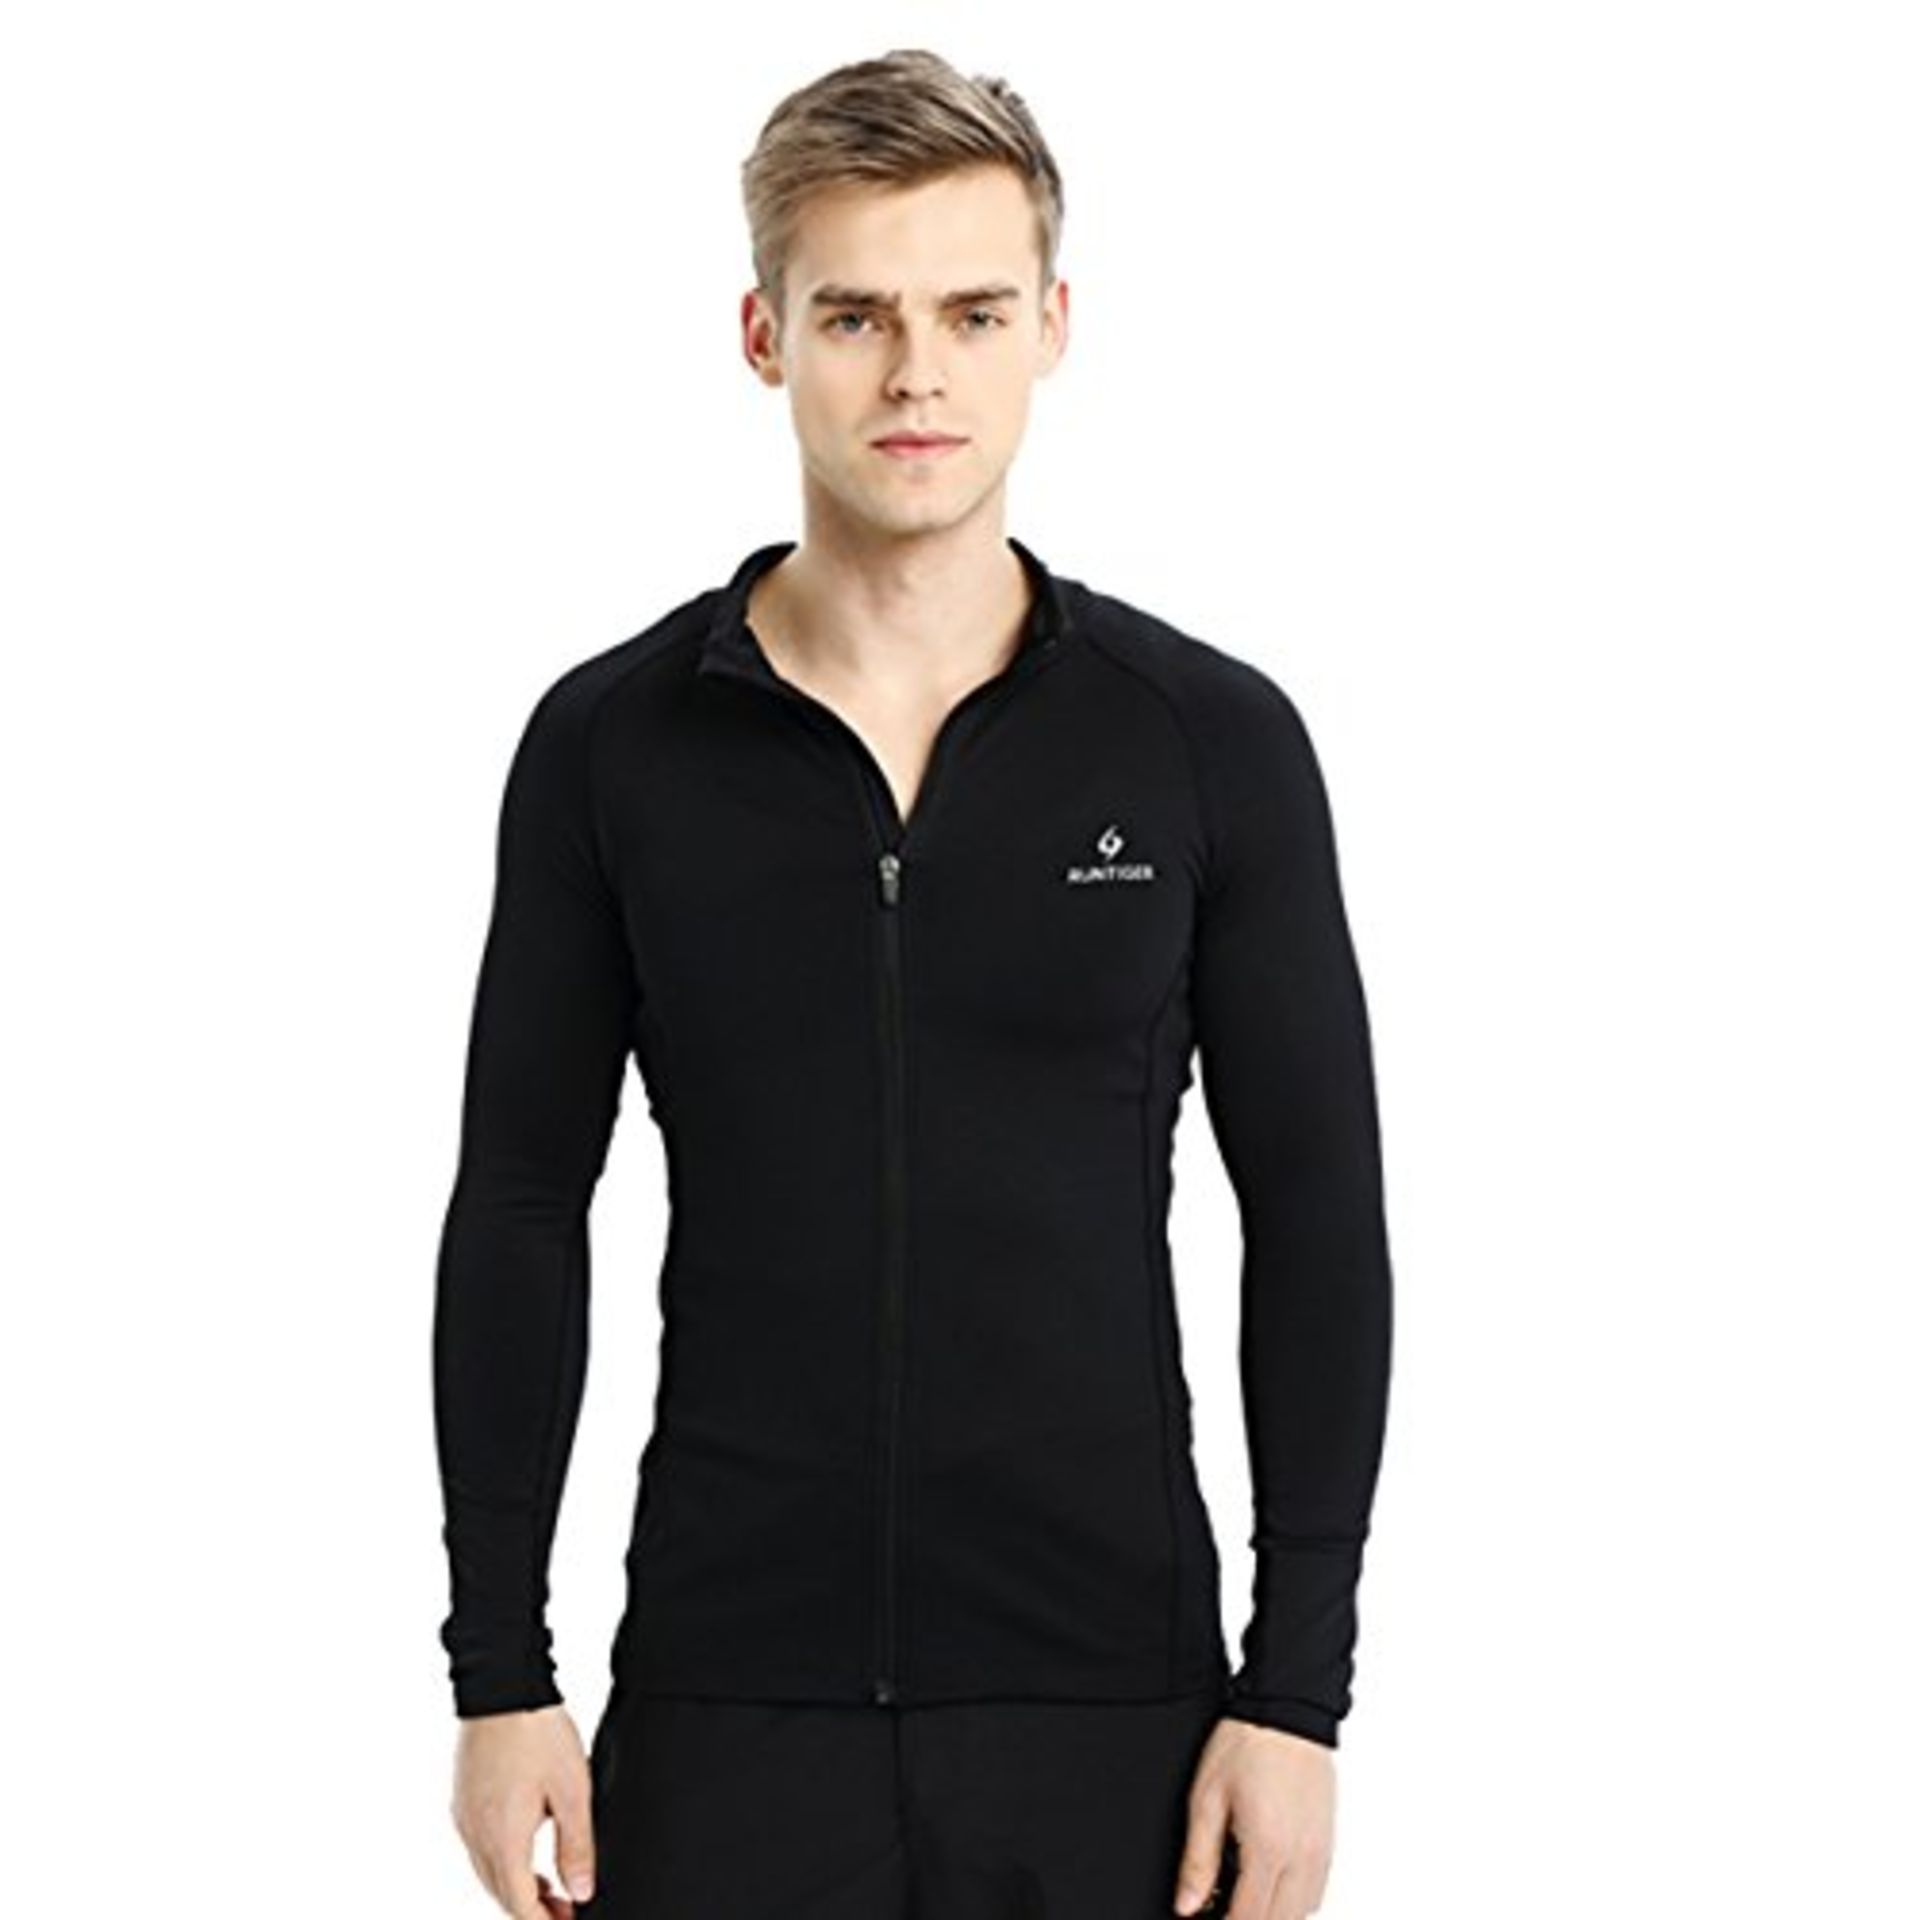 + VAT Brand New Black Runtiger Long Sleeve Running Top Size M - Item is simelar to picture